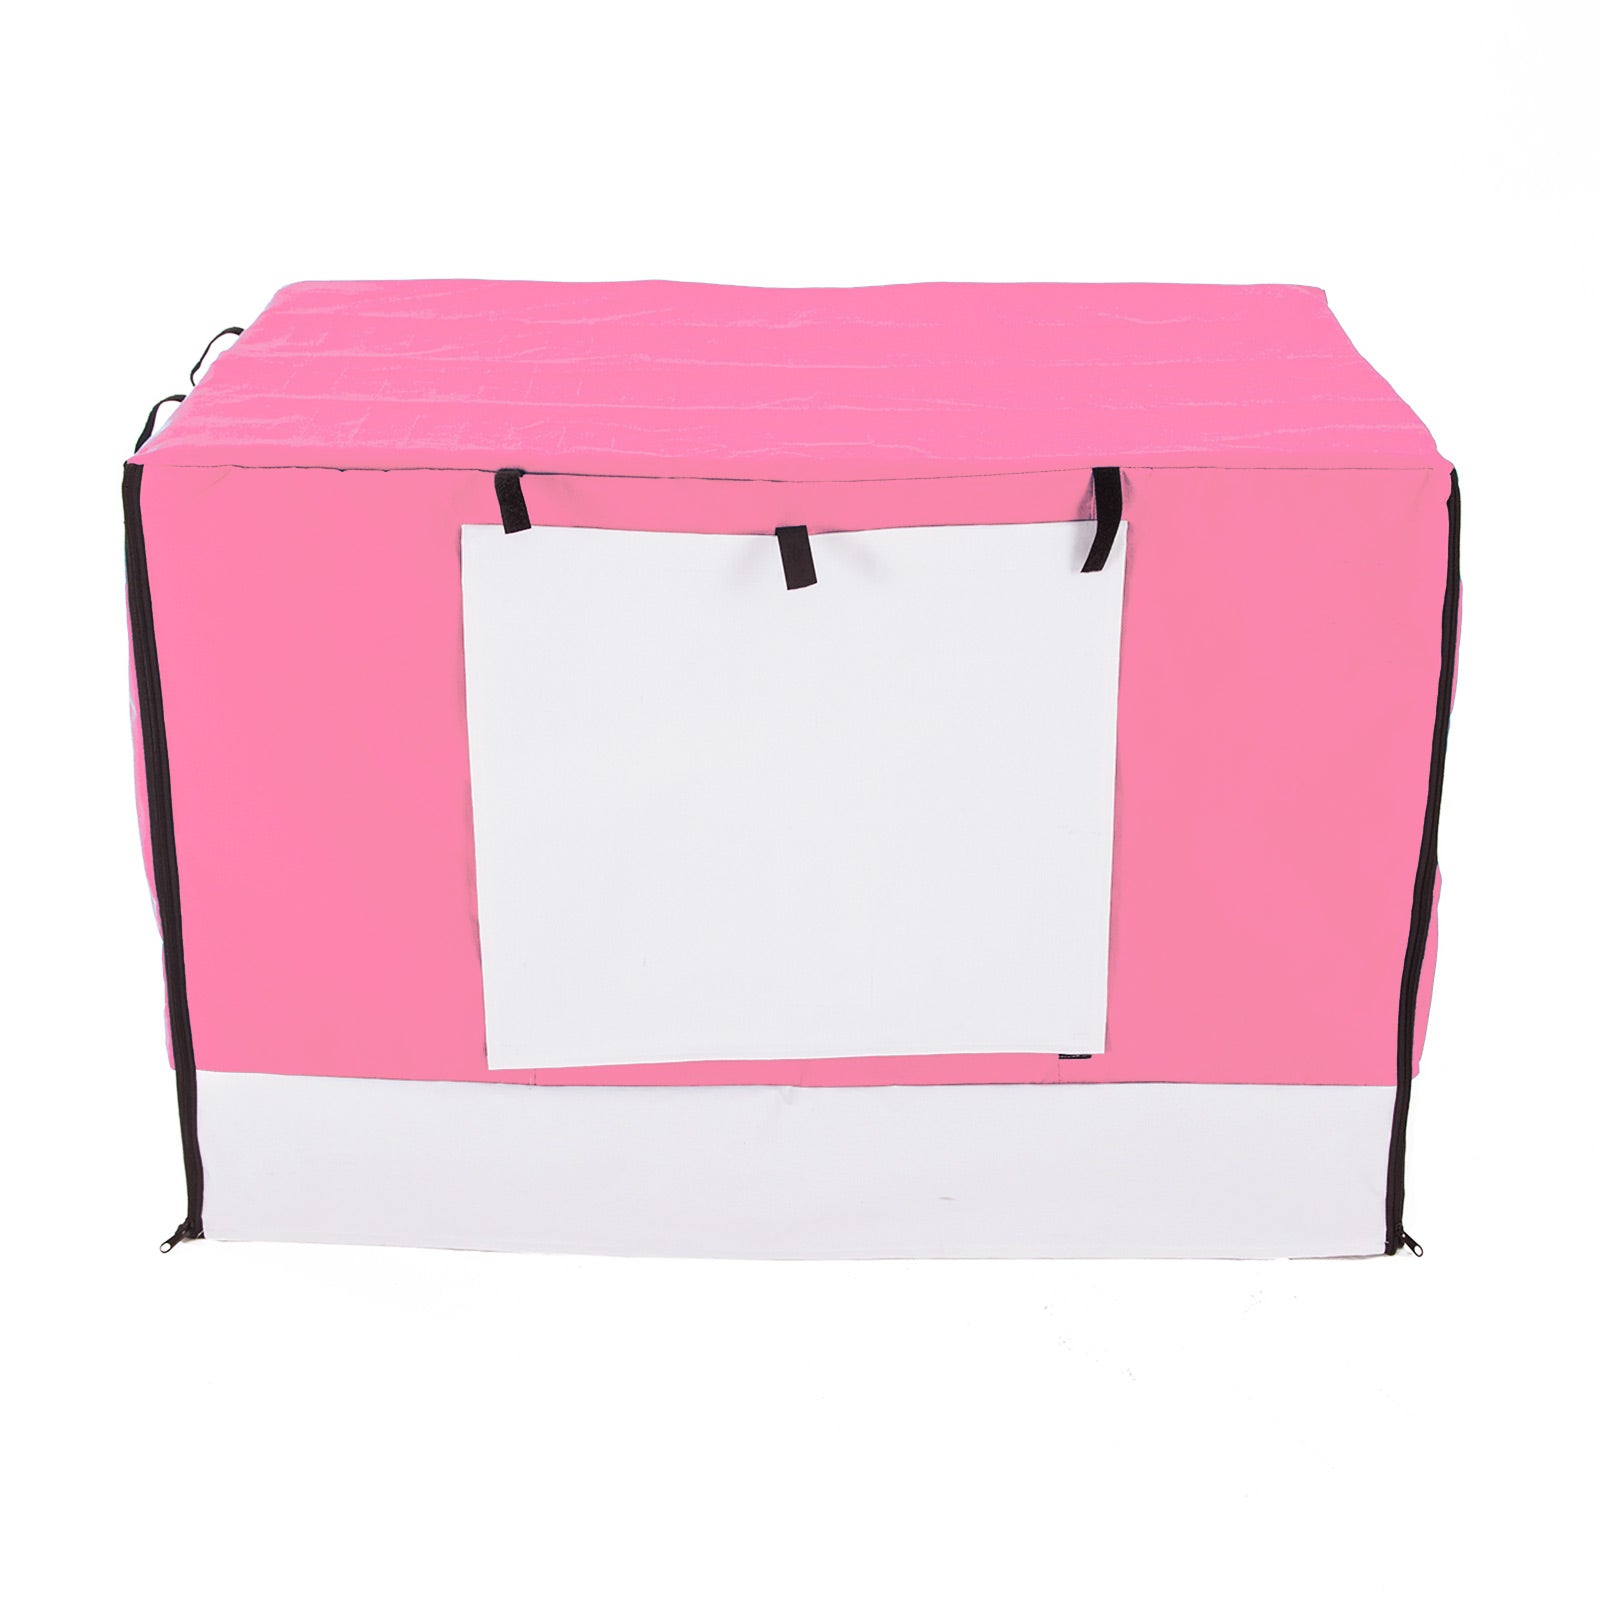 Paw Mate Pink Cage Cover Enclosure For Wire Dog Crate 42In